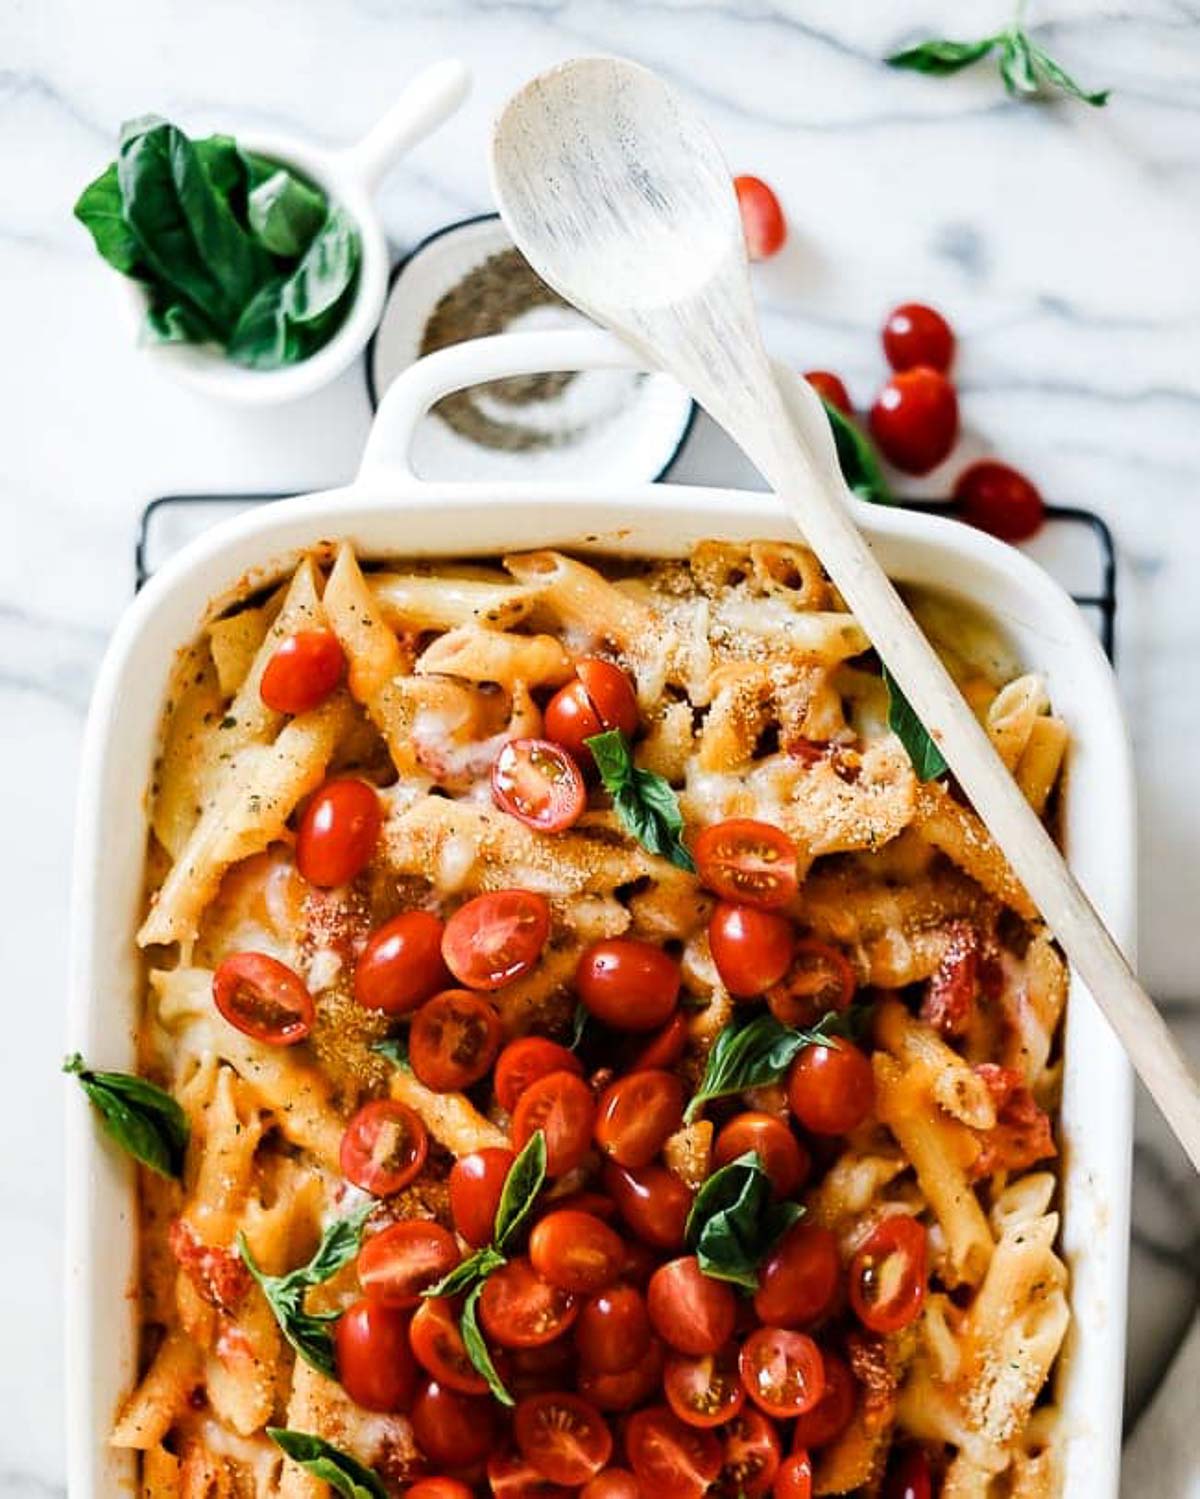 An overhead shot of half a pan of penne pasta bake in a white roasting pan. There is a small bowl of basil and a small bowl of pepper to the side.